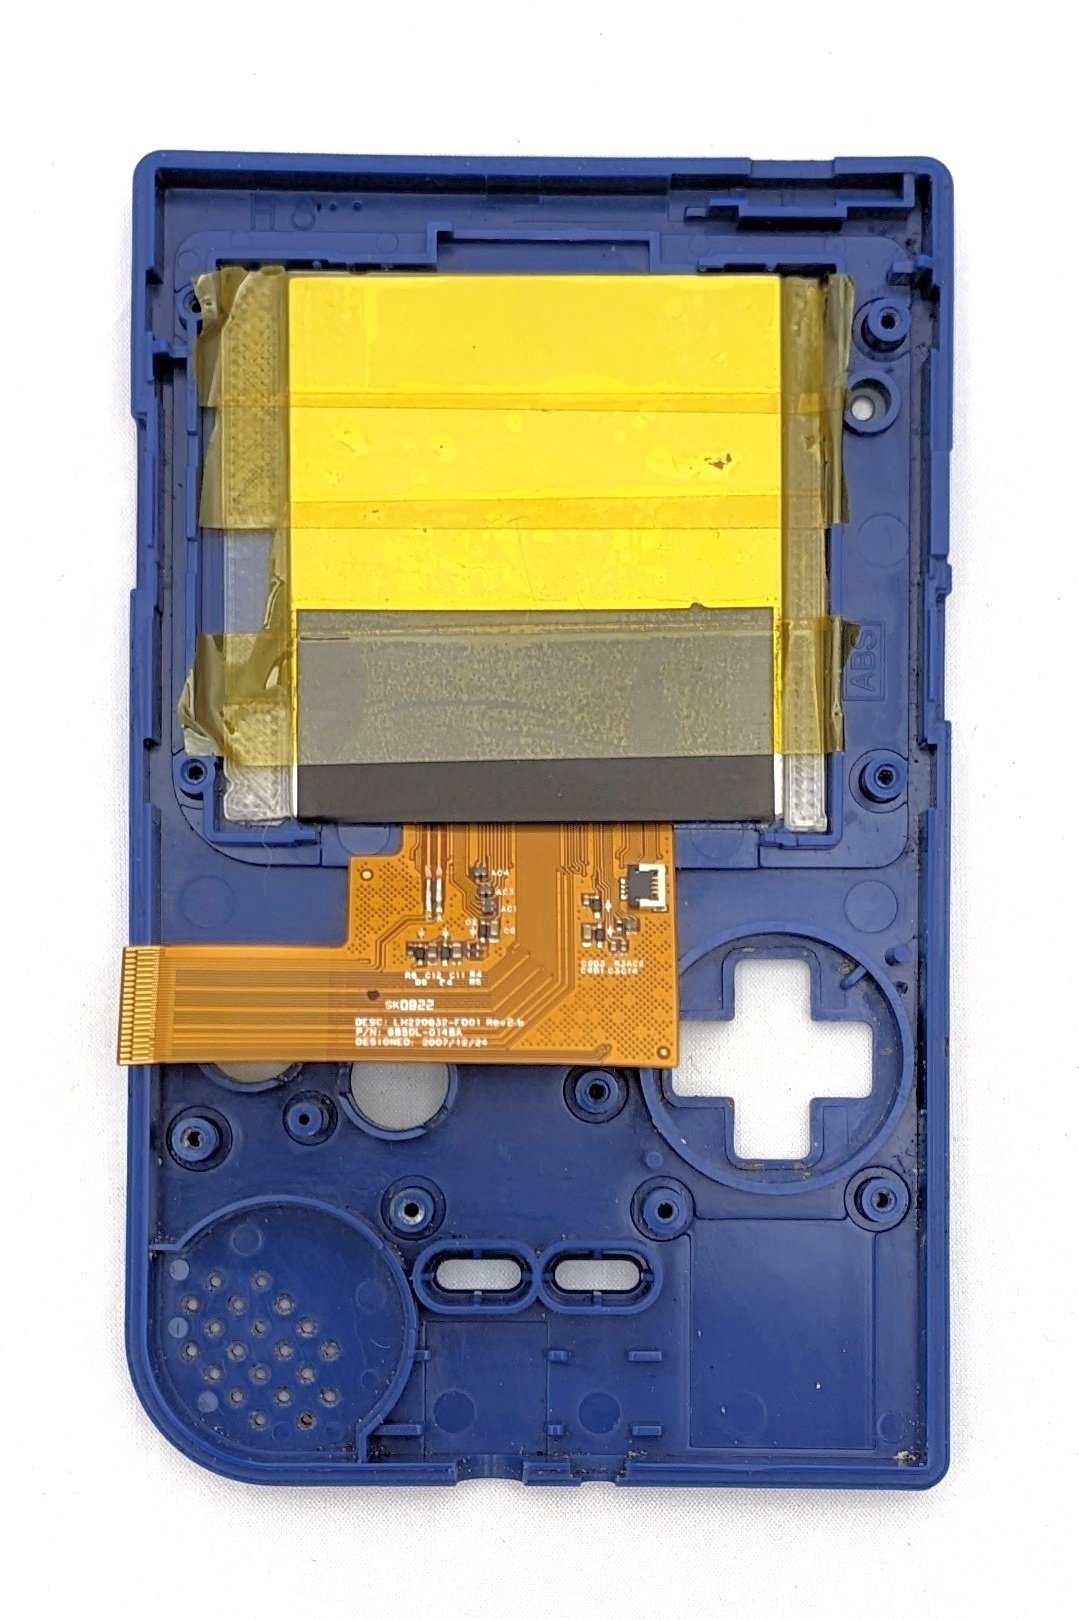 The inside shell of a game boy with a new screen implemented and covered with kapton tape